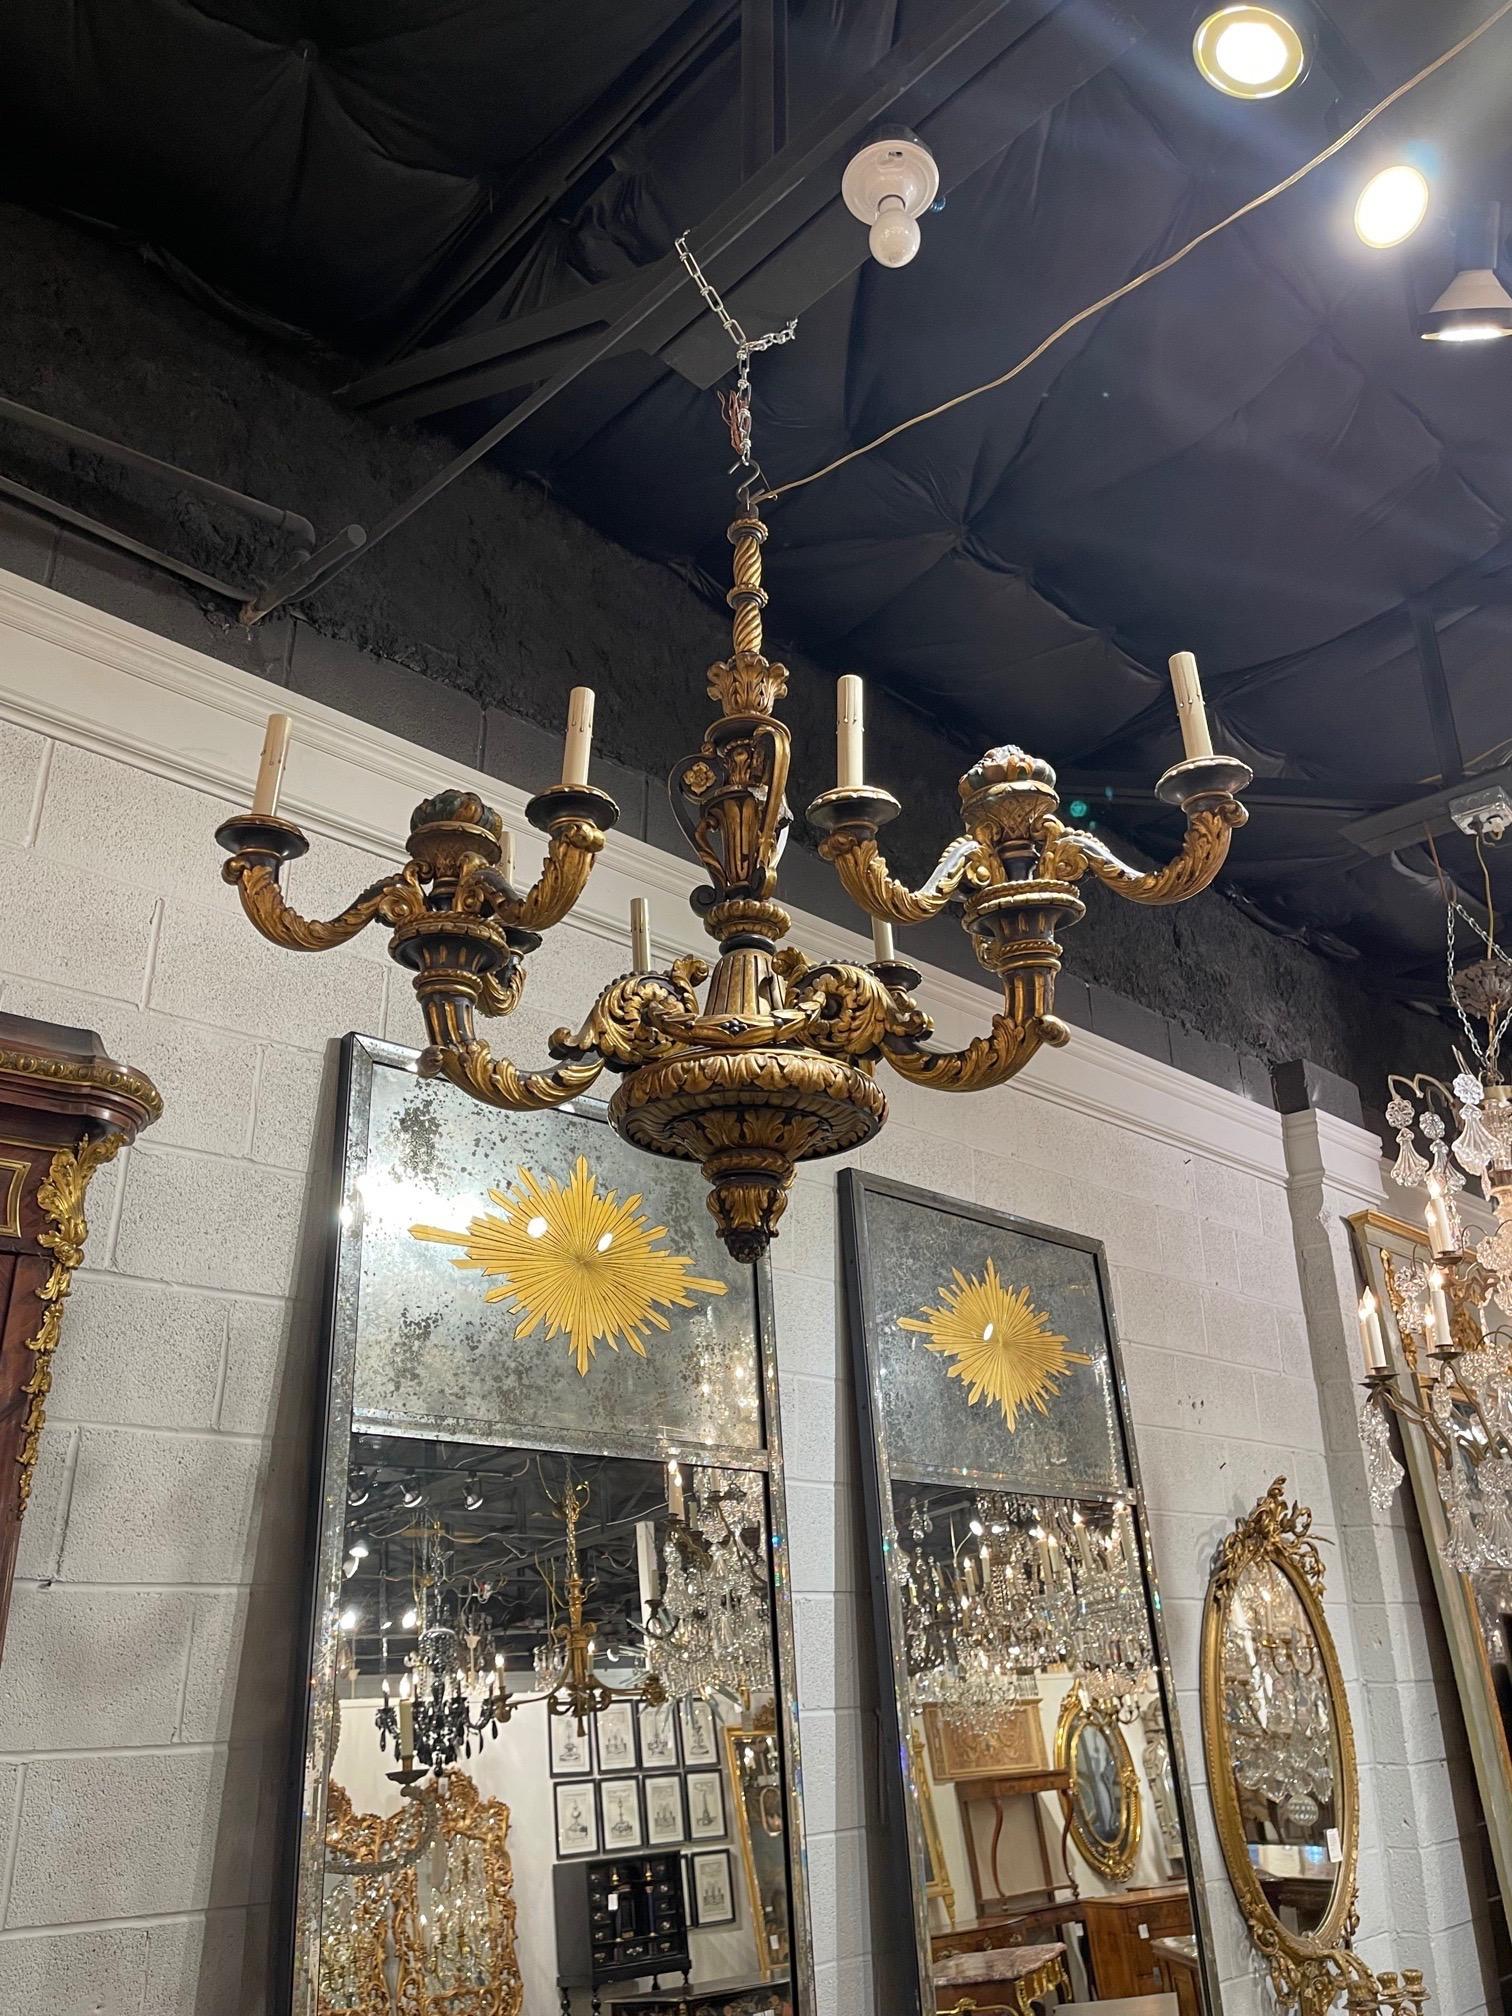 Very fine 19th century French carved and poly chromed 9 light wood chandelier. Beautiful intricate carvings make this fixture extra special!